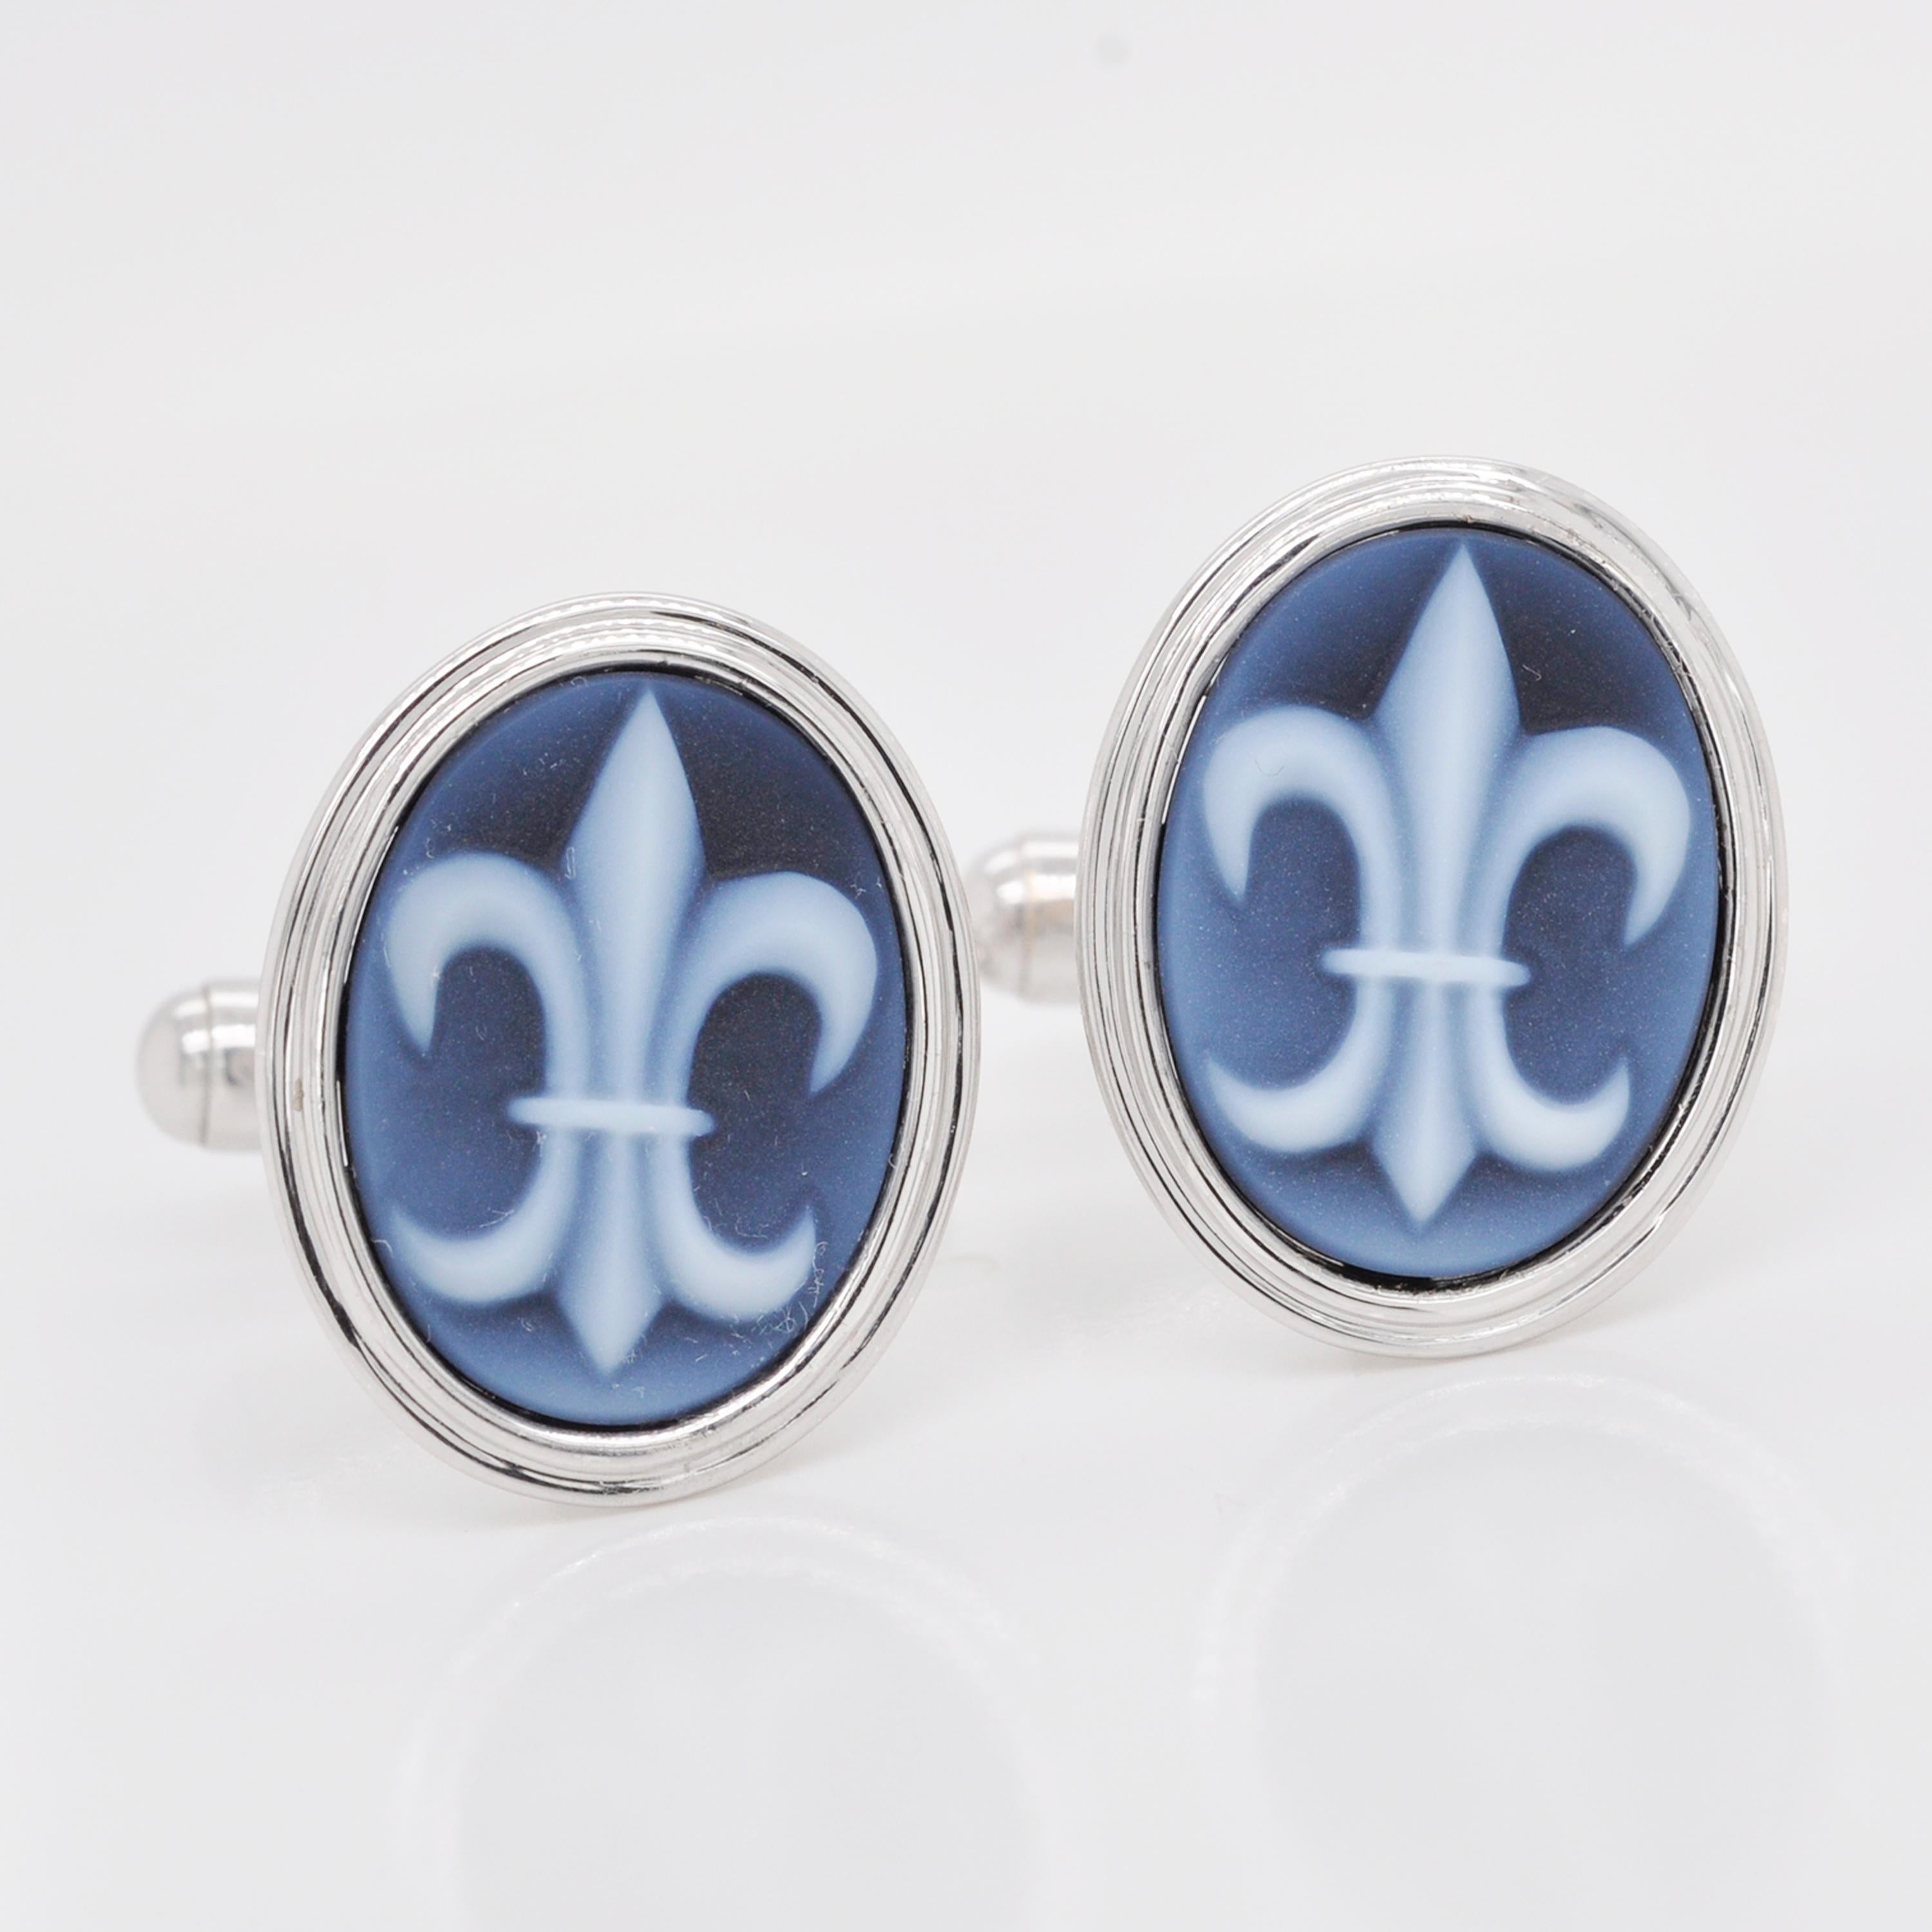 Royal Symbol Fleur-de-Lis Agate Carving Sterling Silver Gemstone Cufflinks In New Condition For Sale In Jaipur, Rajasthan